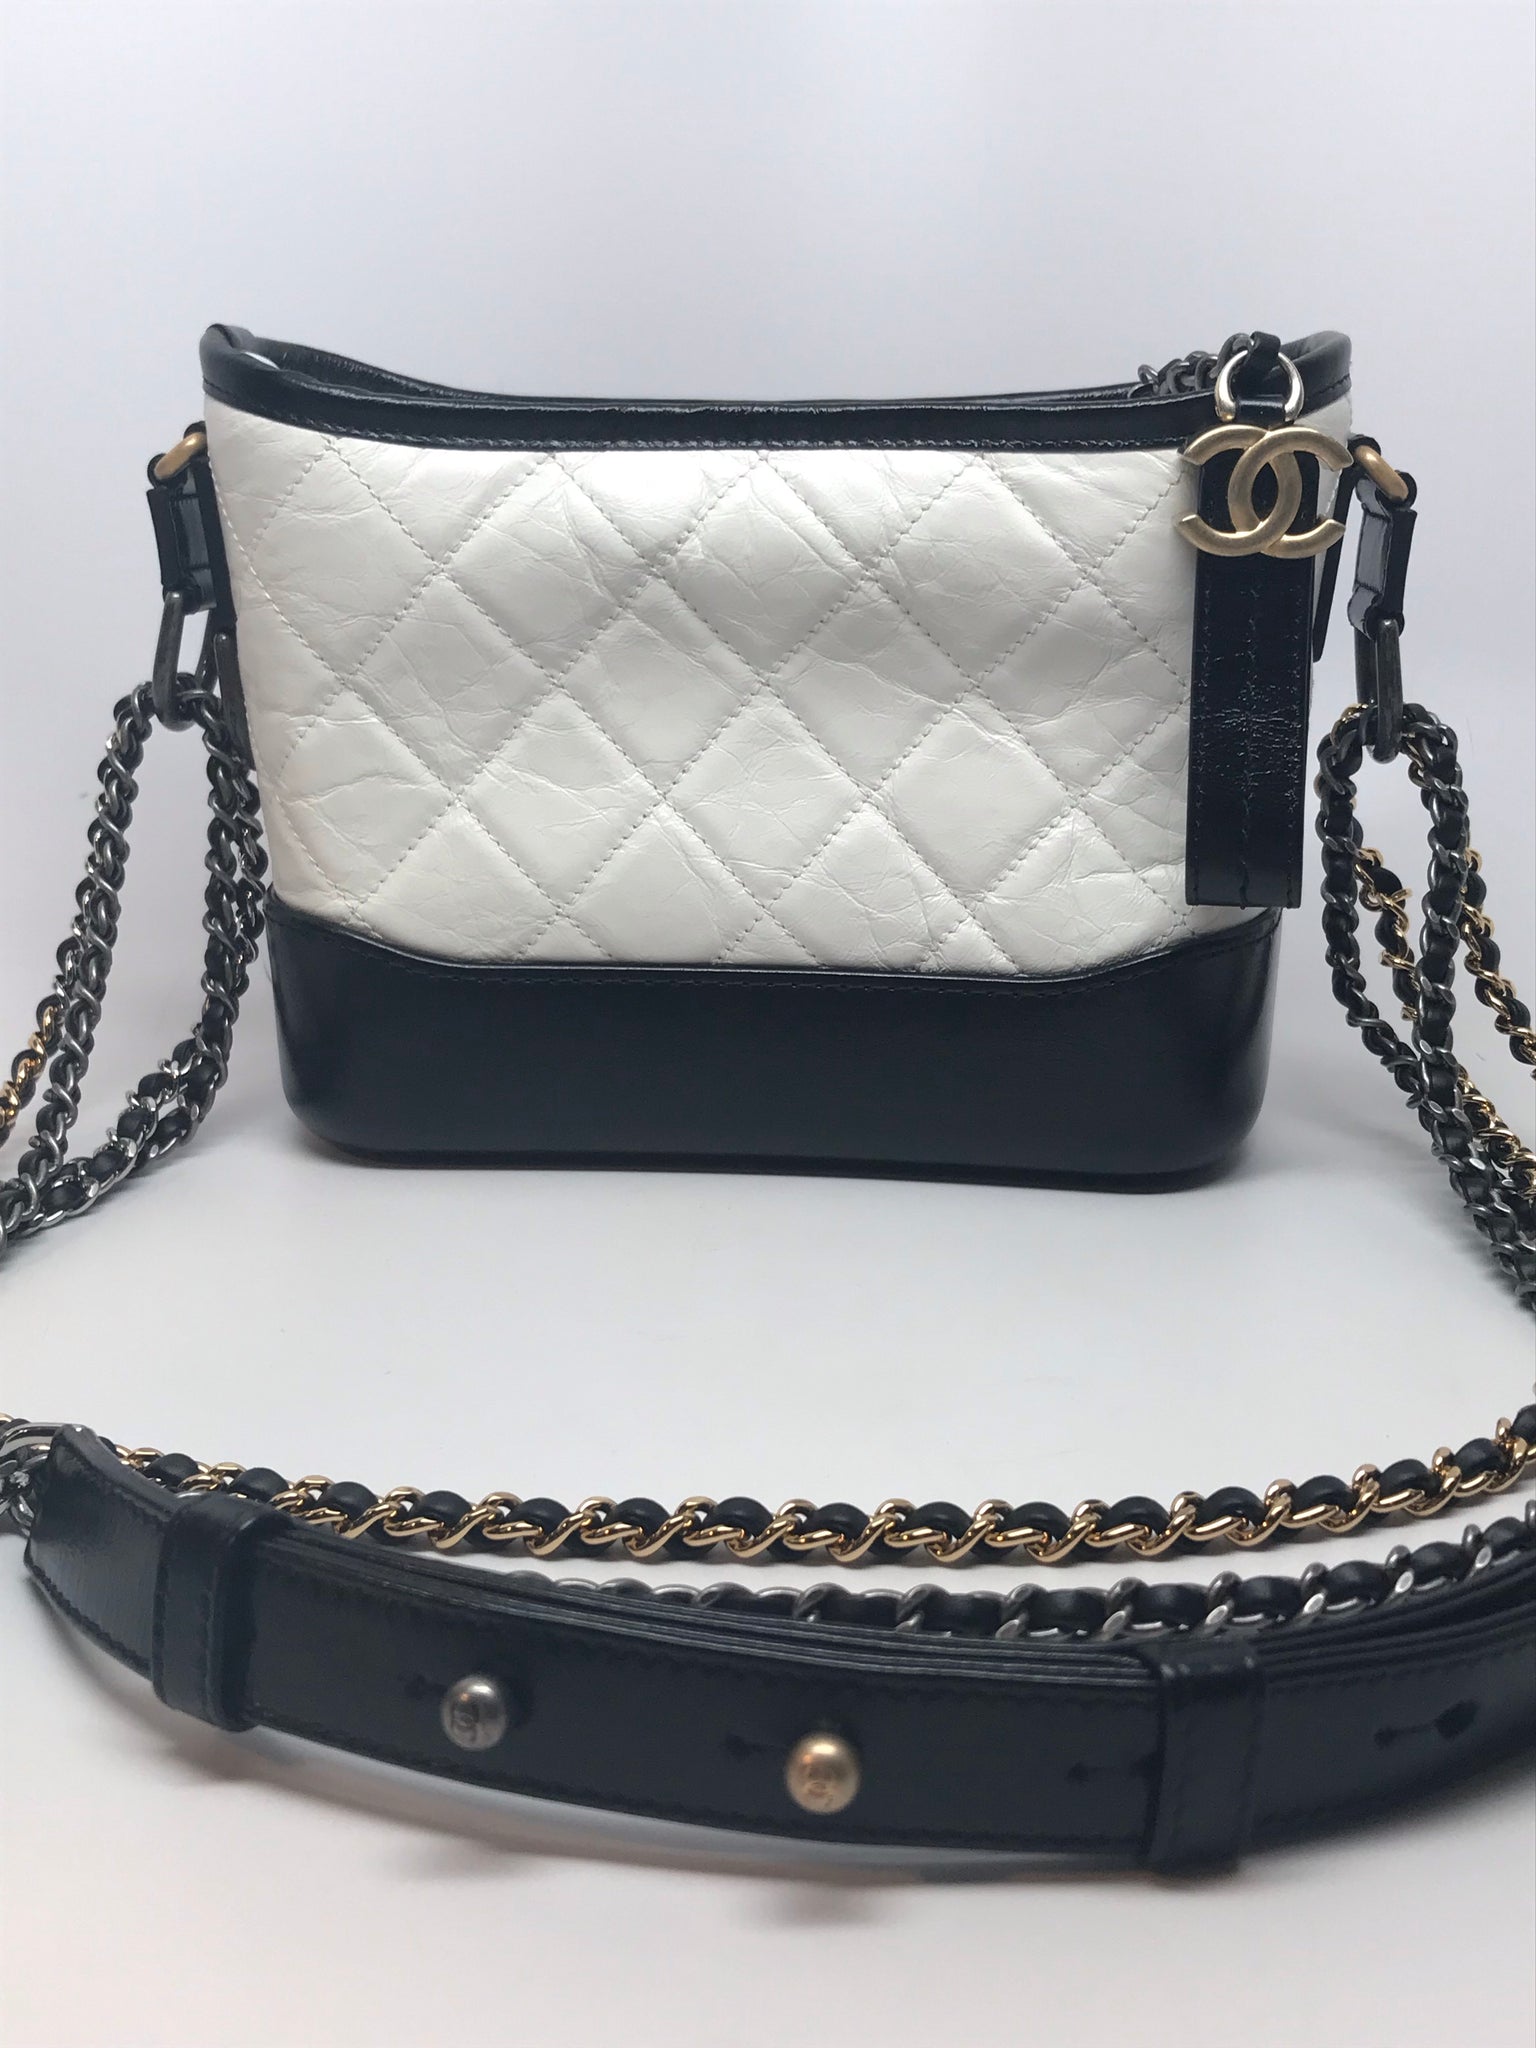 CHANEL BLACK AND WHITE SMALL GABRIELLE HOBO BAG